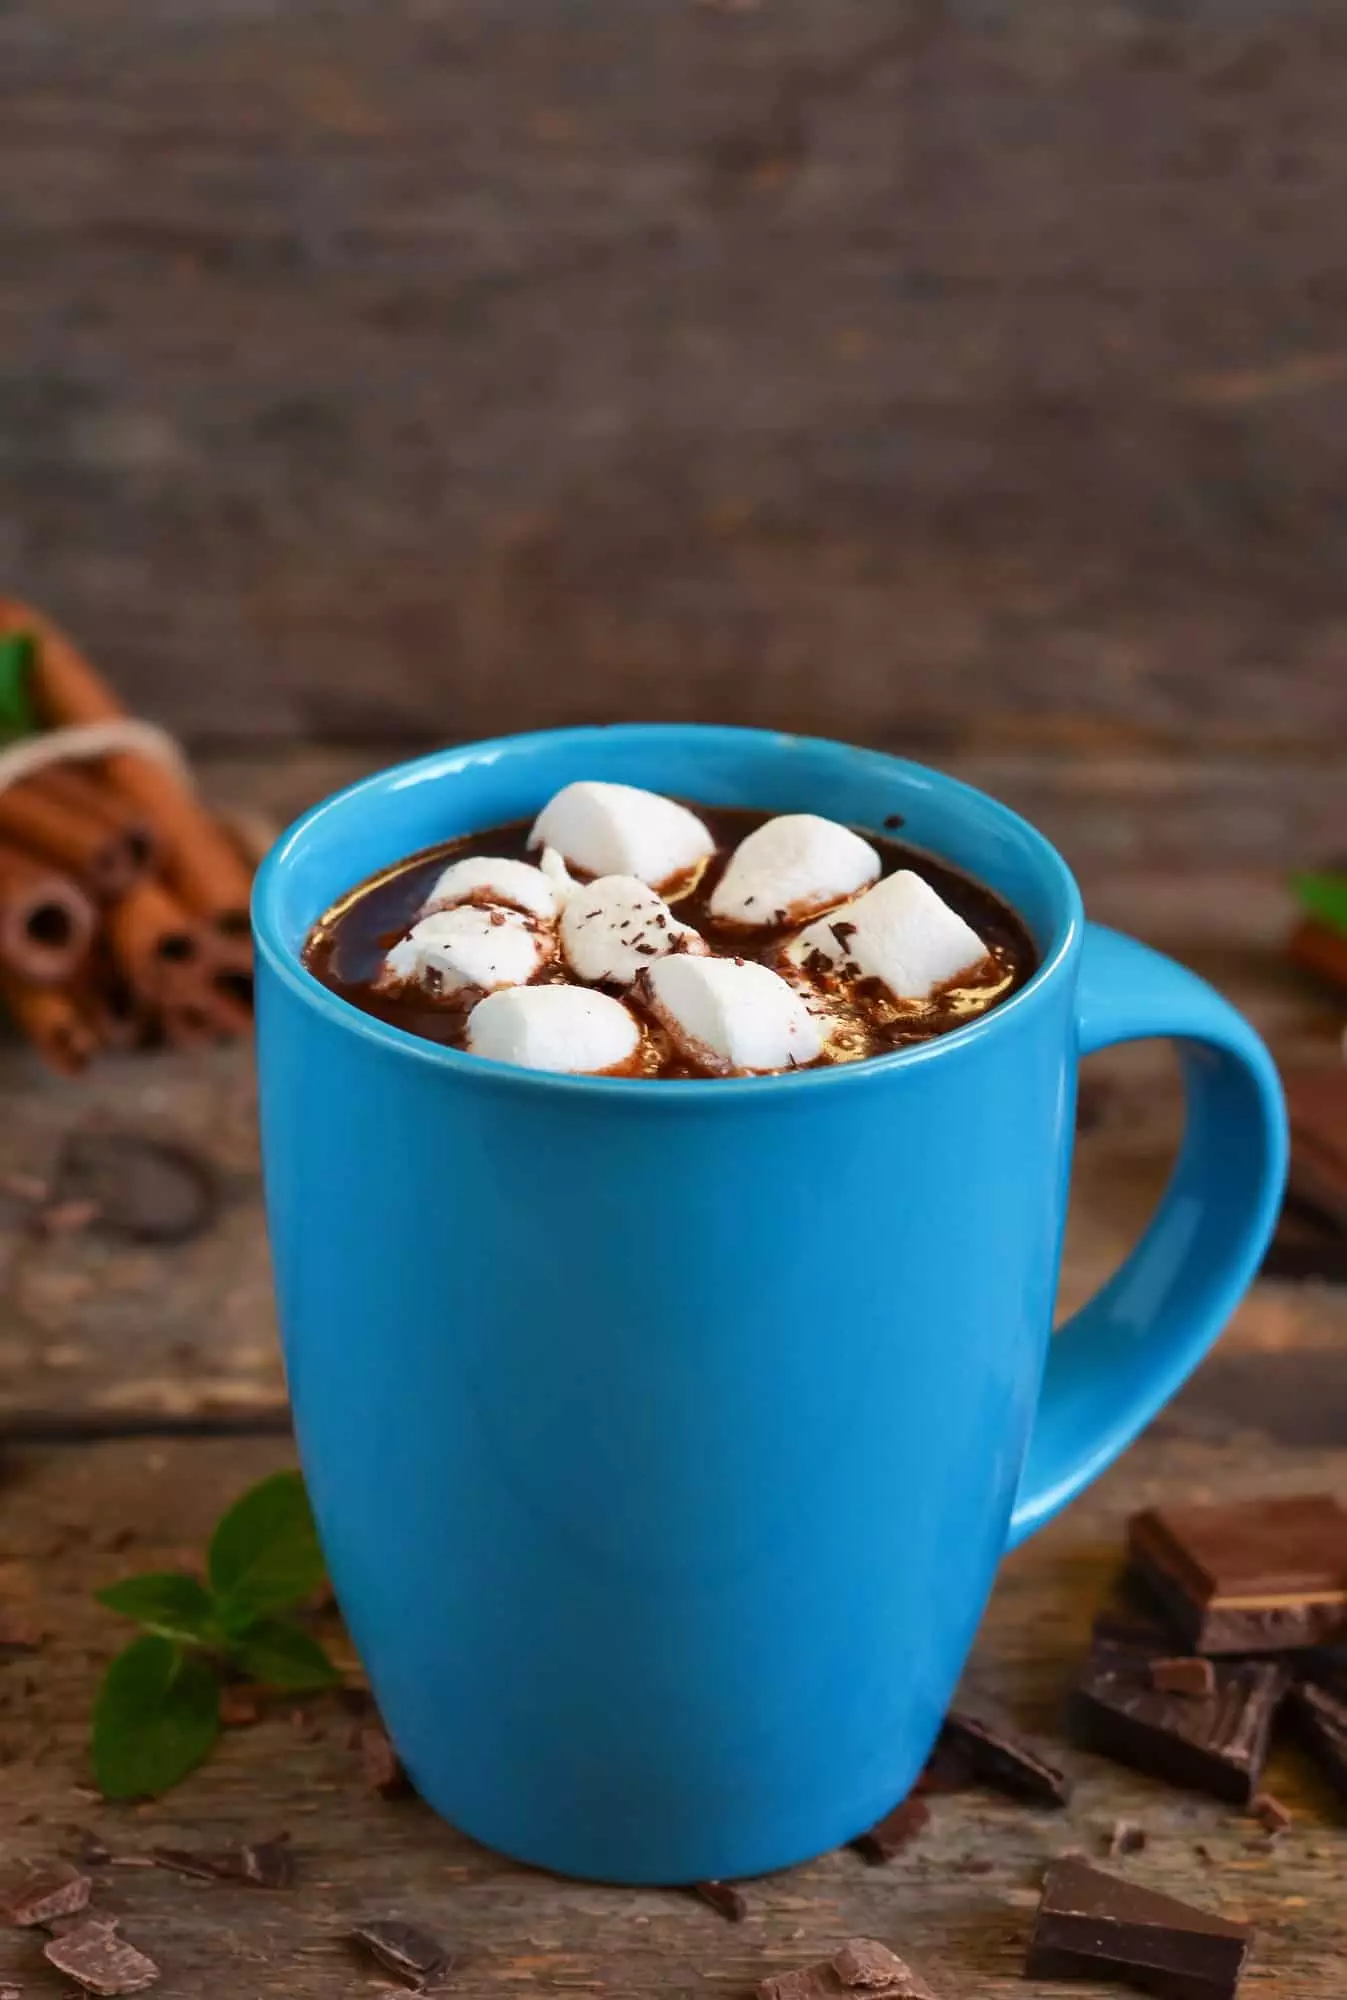 Make the best homemade hot chocolate mix from Made in a Pinch. For more helpful tips and delicious recipes follow us on Pinterest.